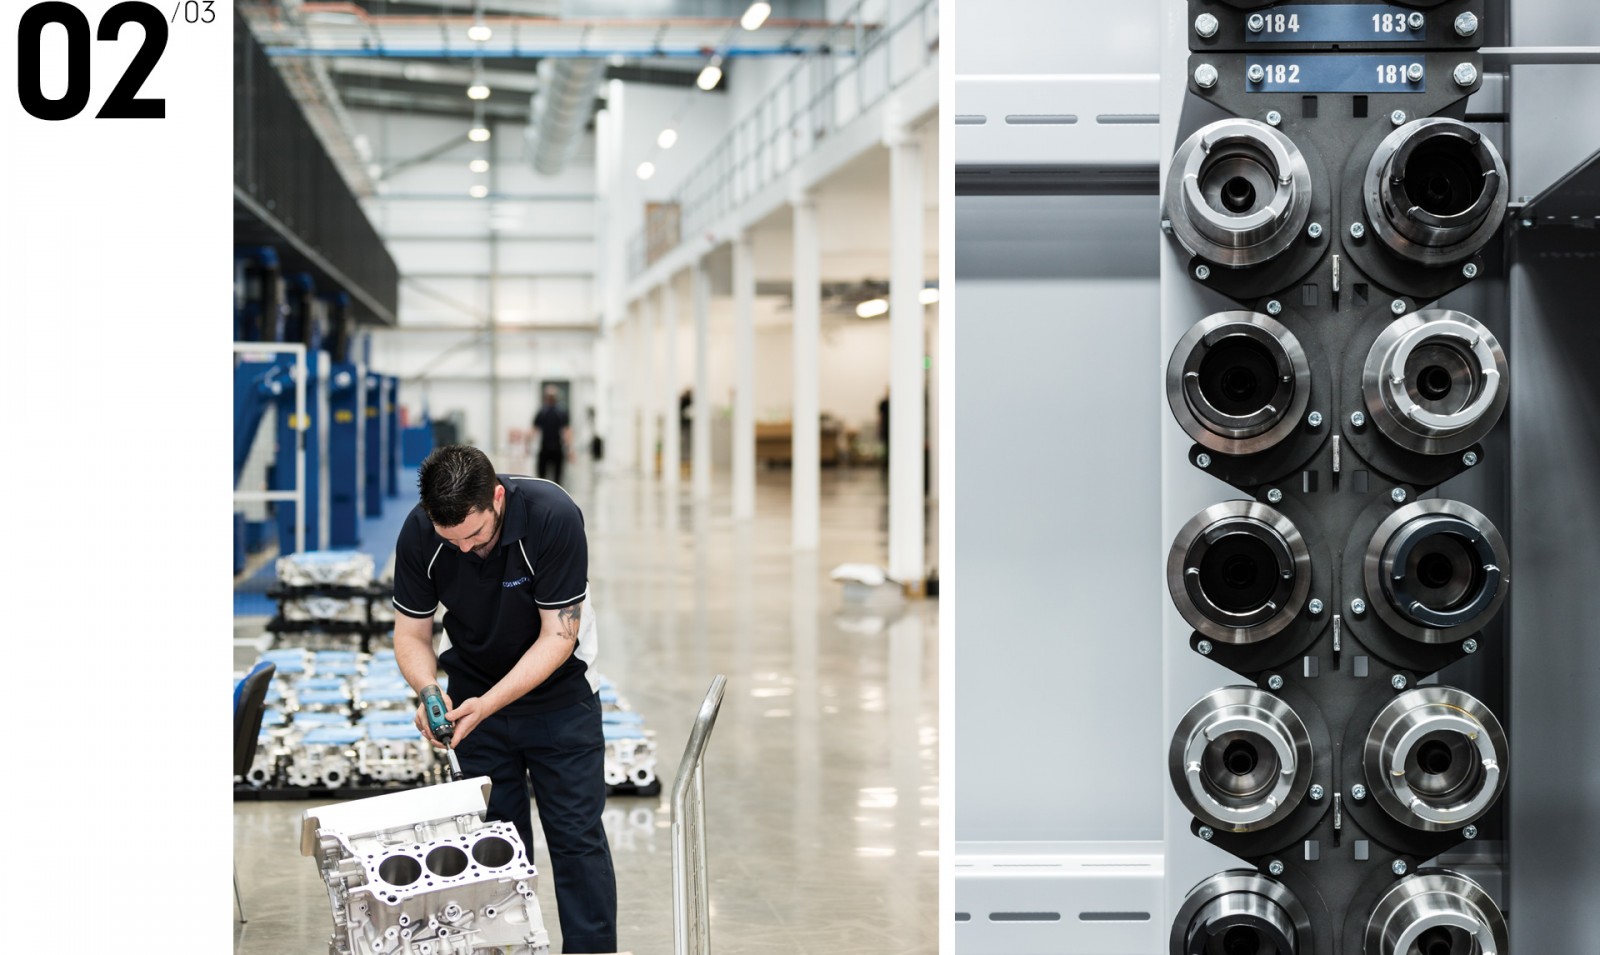 Cosworth Engineering Case Study Film and Reportage Photoshoot - Secondary Full Width Image